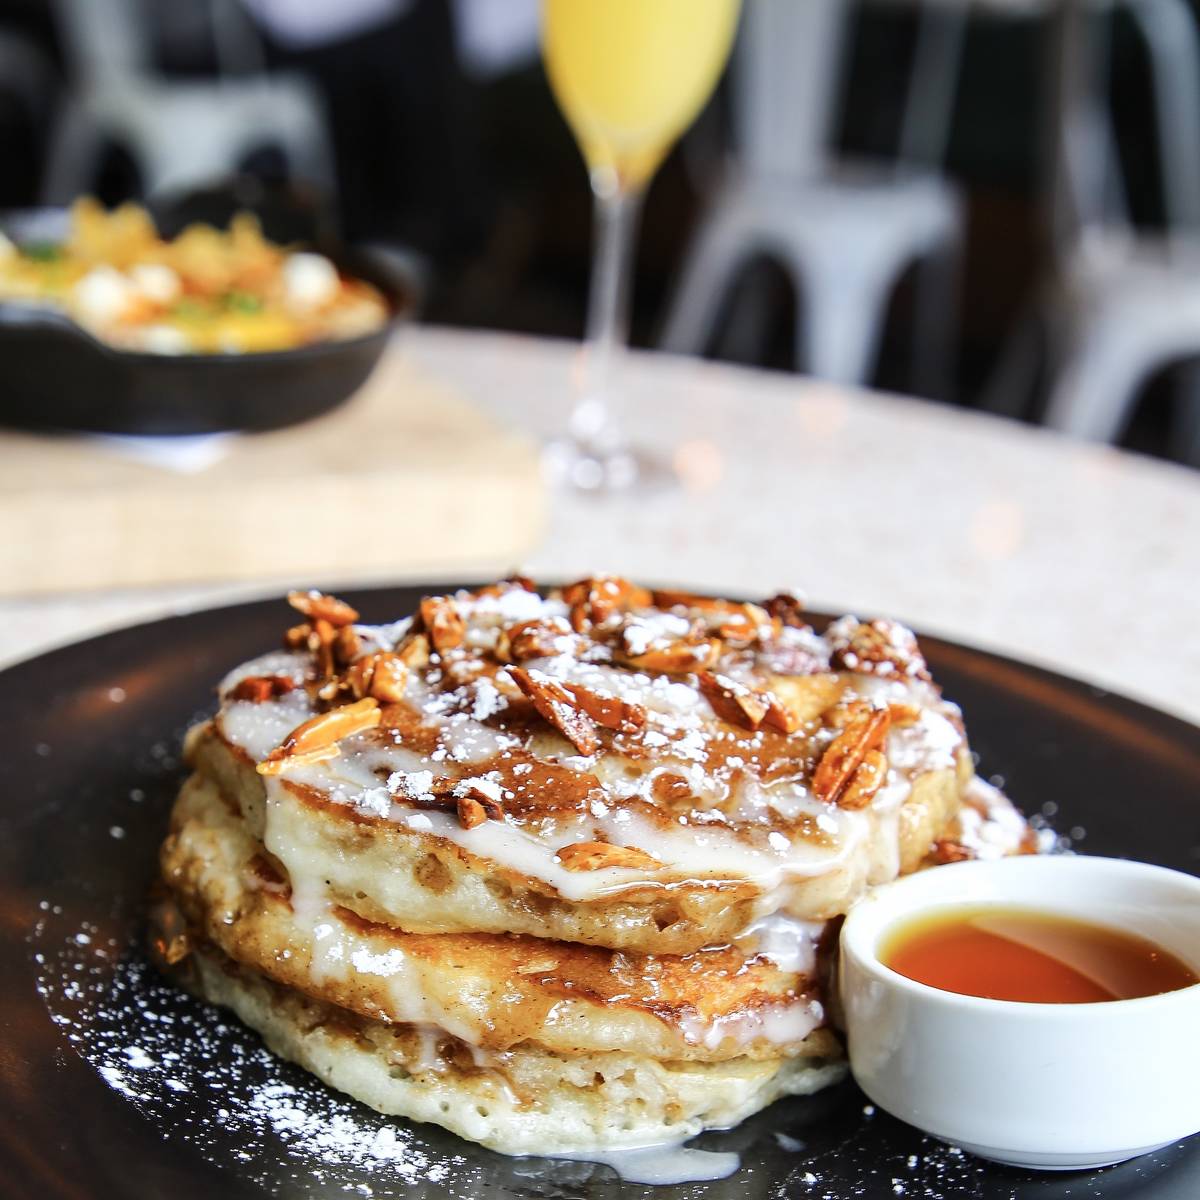 Cinnamon roll pancakes at Catch. (Catch)